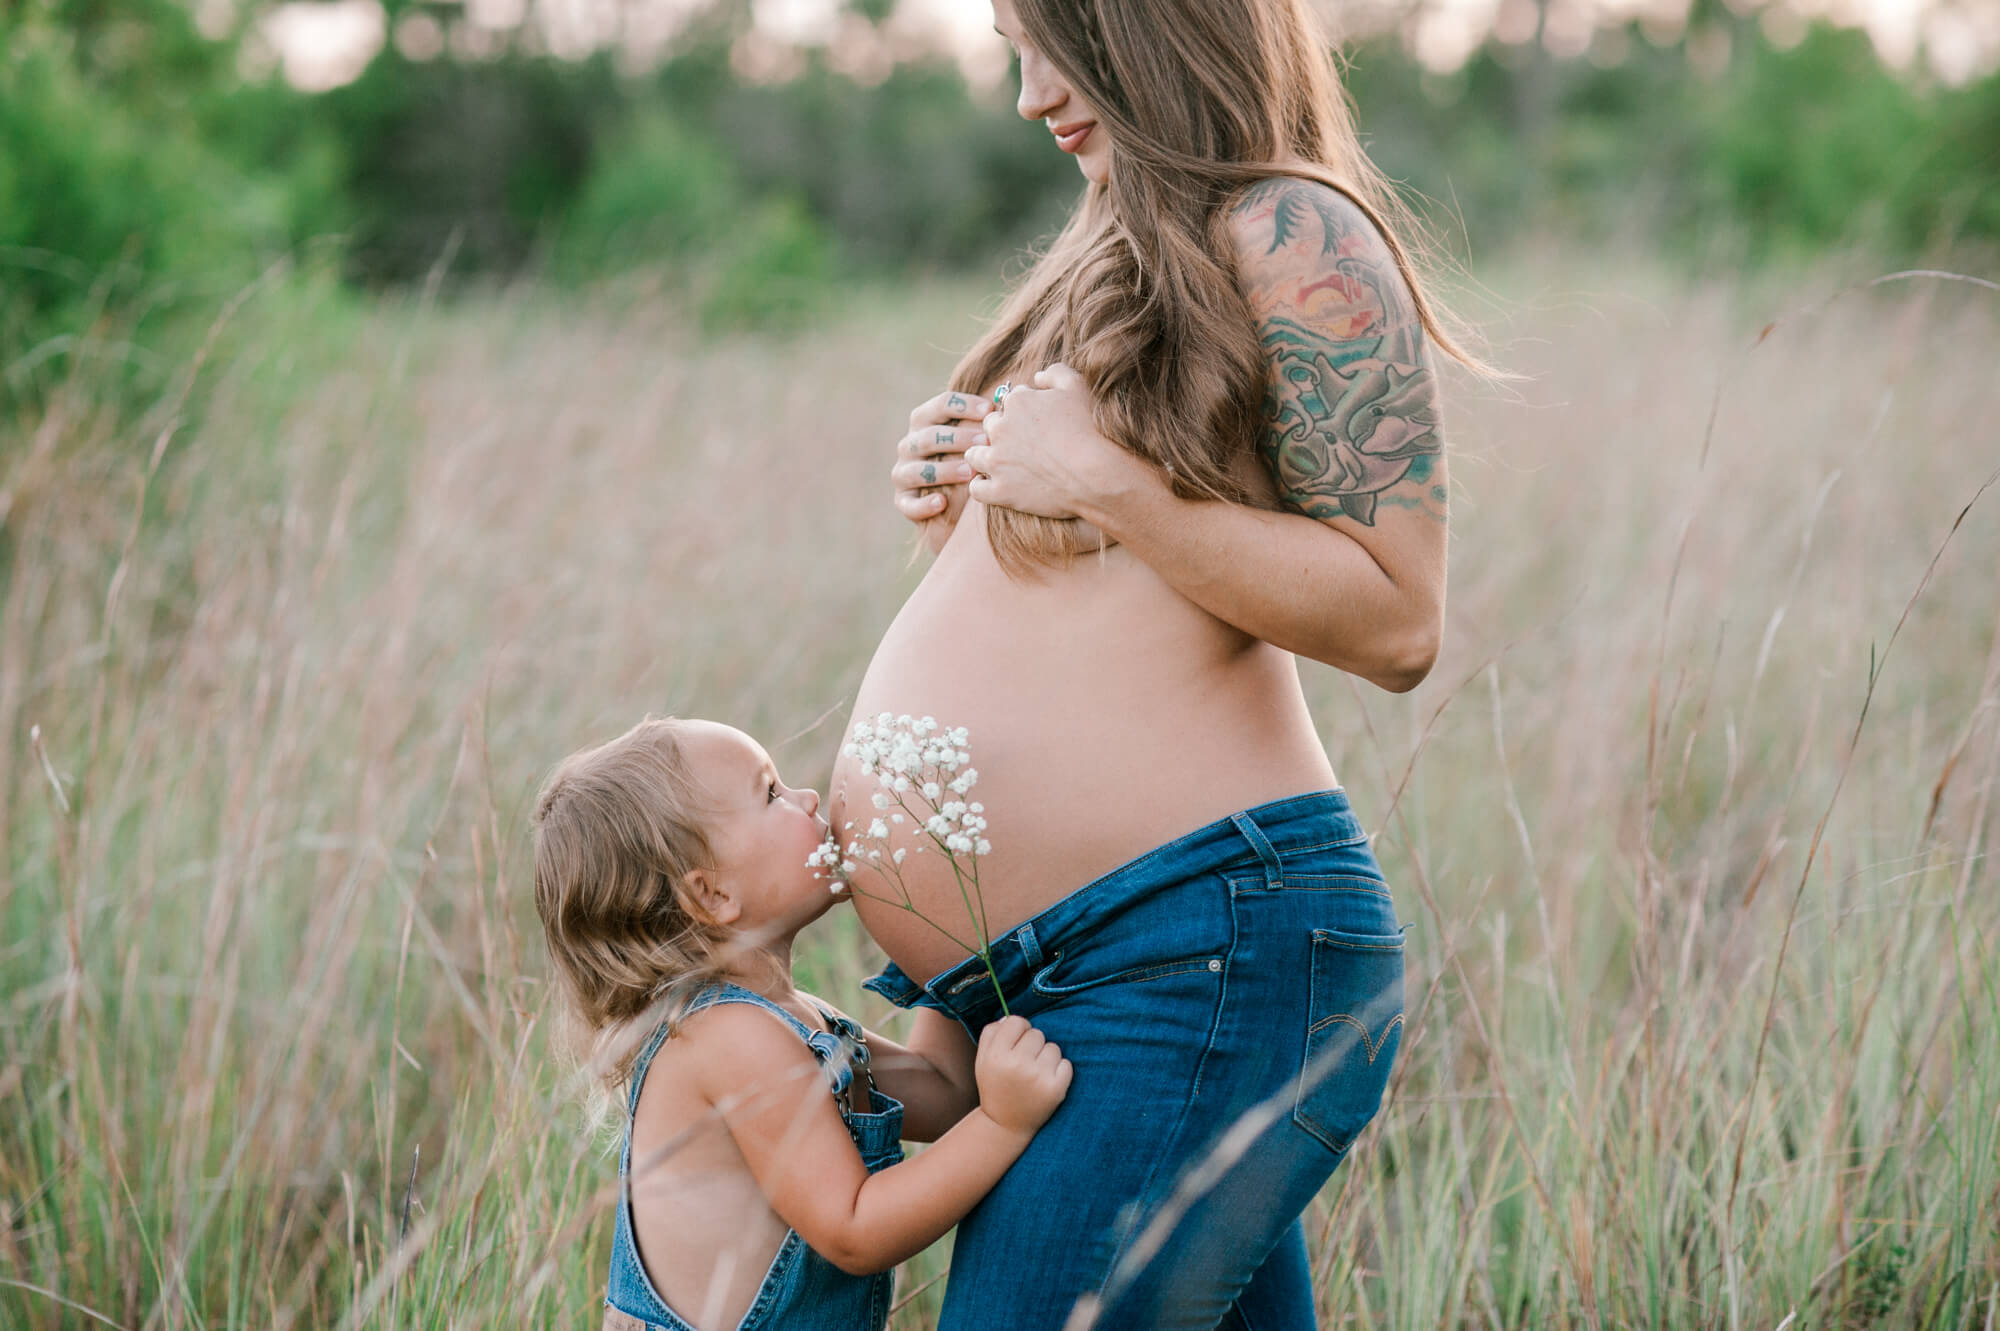 Expectant mom standing in tall grass covering her breasts while her young daughter kisses her pregnant belly at sunset baby fairy tale